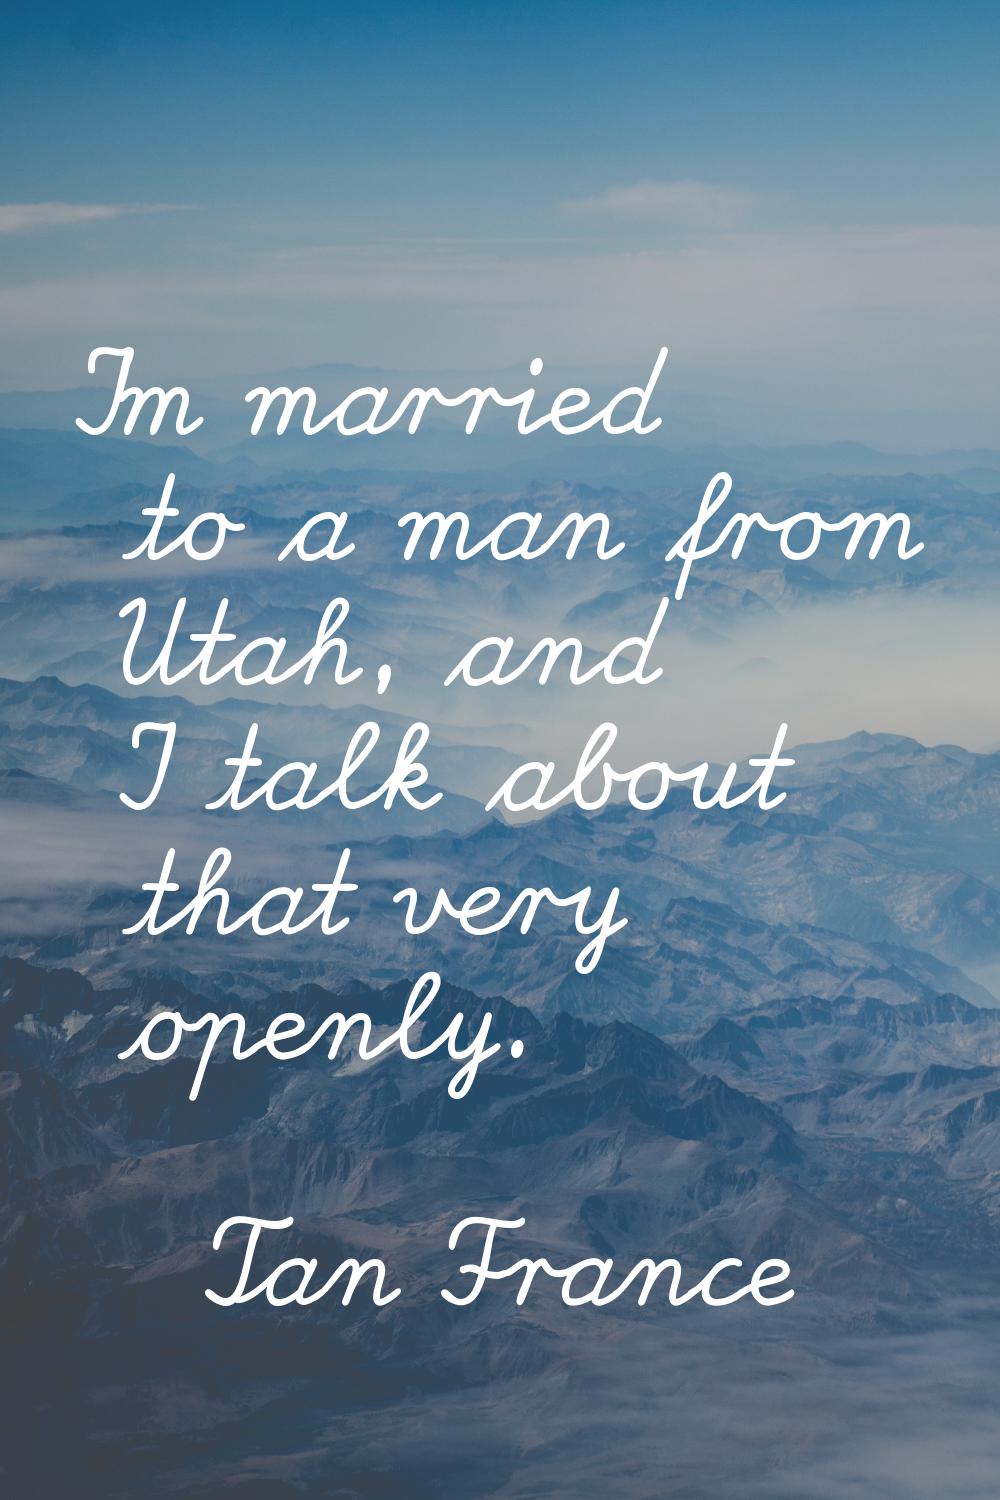 I'm married to a man from Utah, and I talk about that very openly.